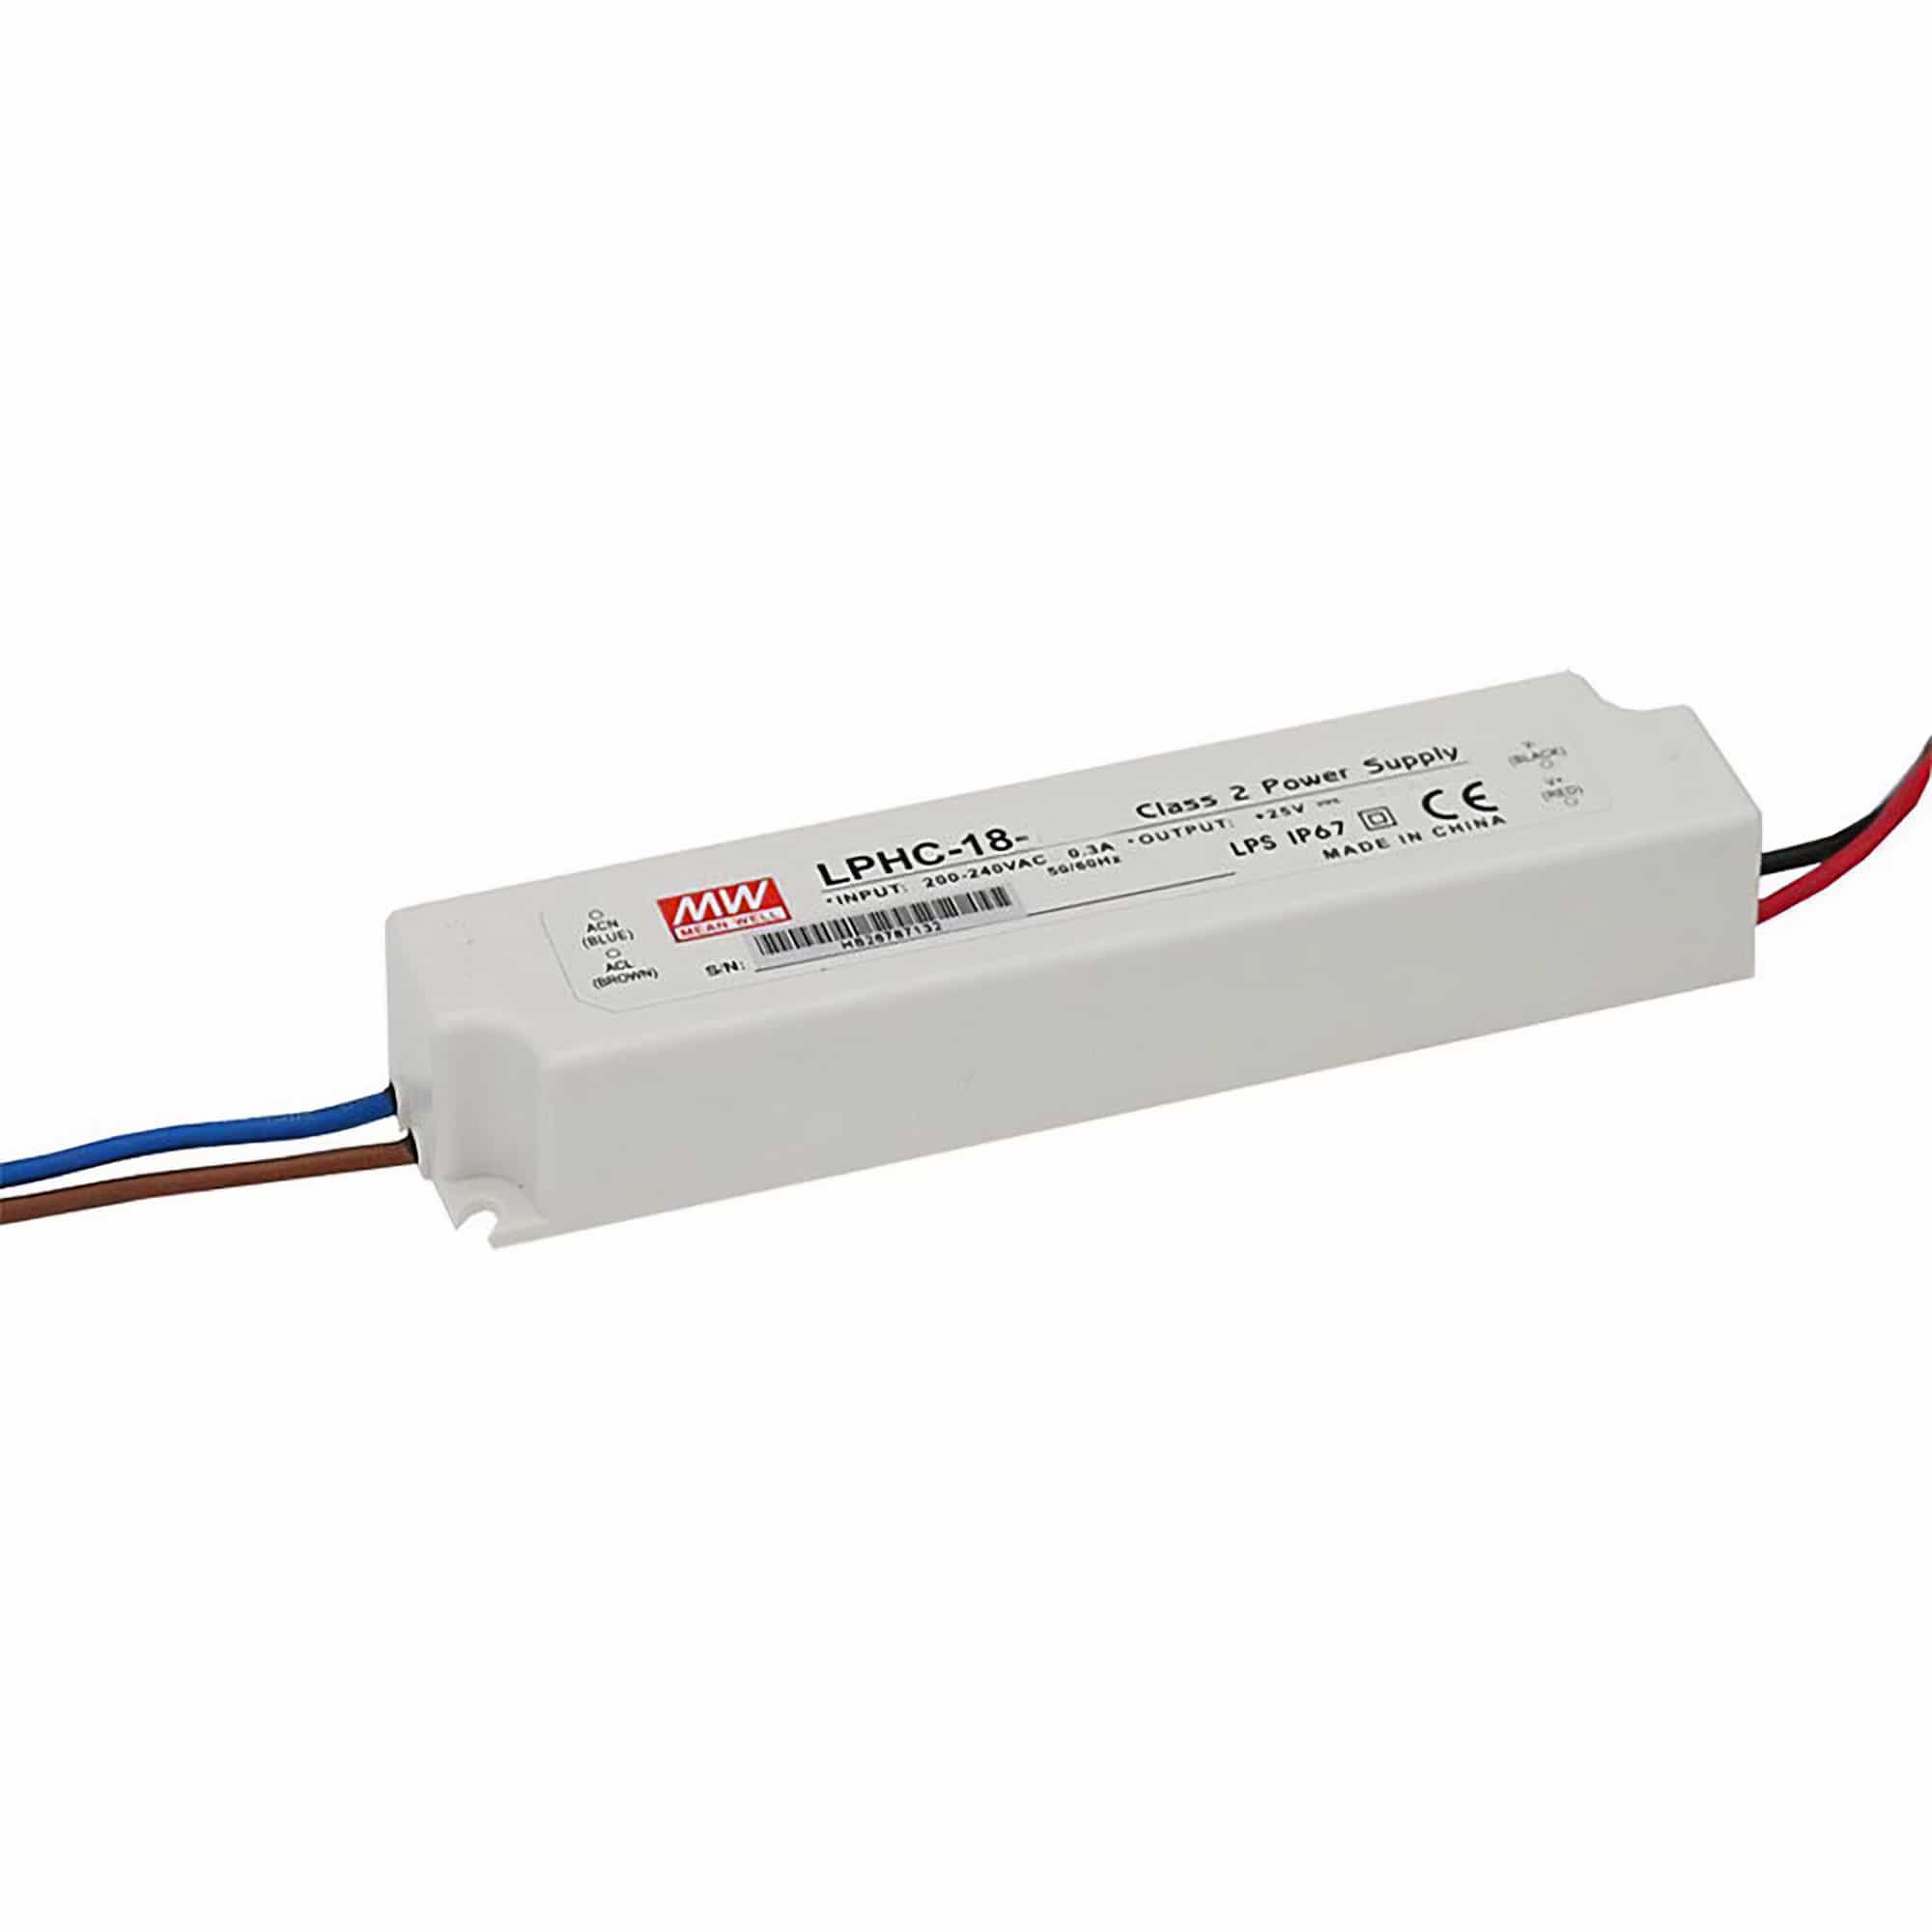 Mean Well LED Driver LPHC-18-700 700mA (6-25v) IP67 (Helen